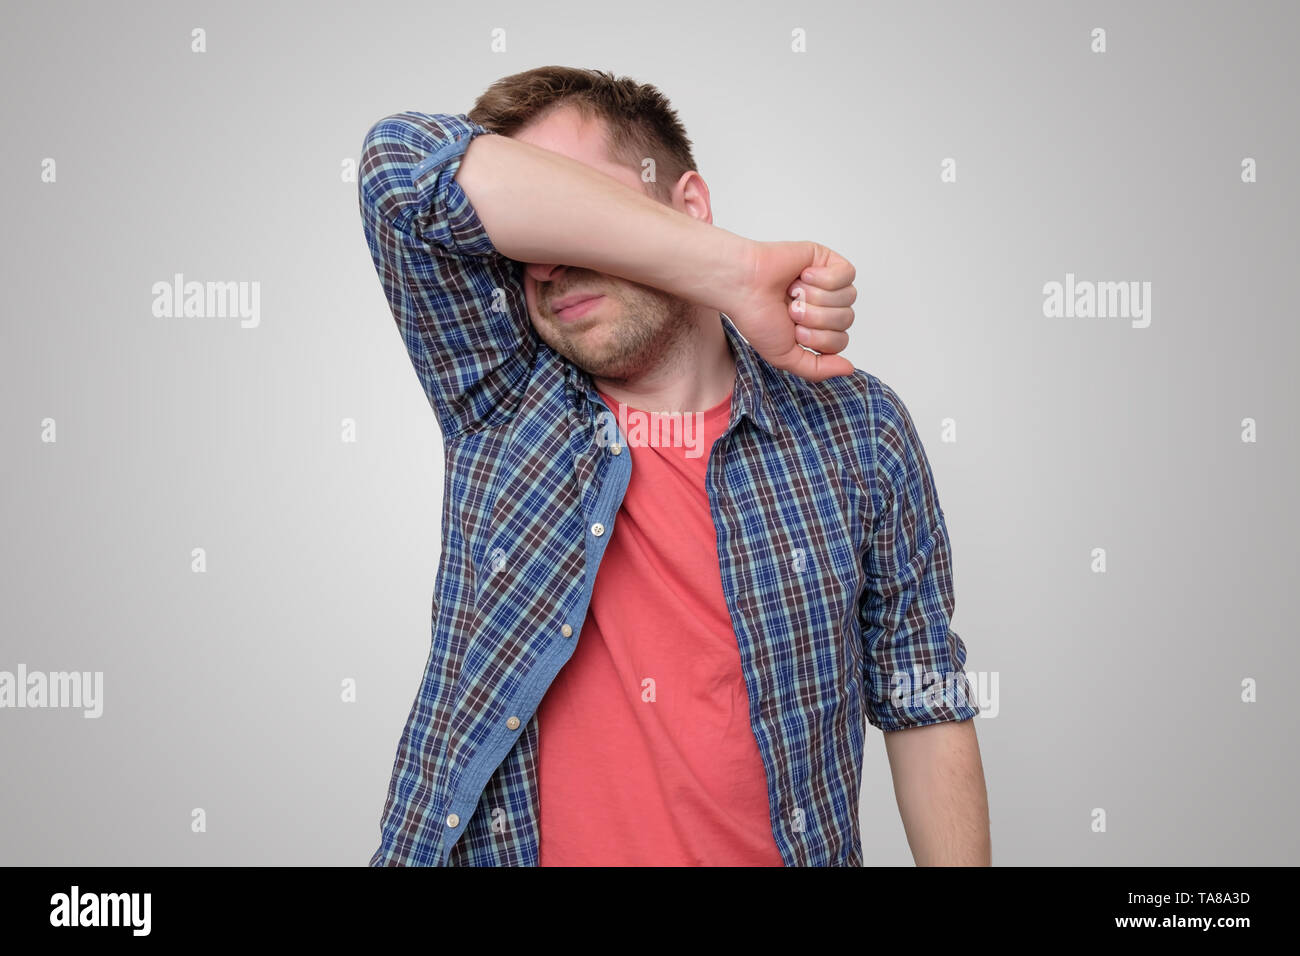 Feeling depressed. Man covering face with hand Stock Photo